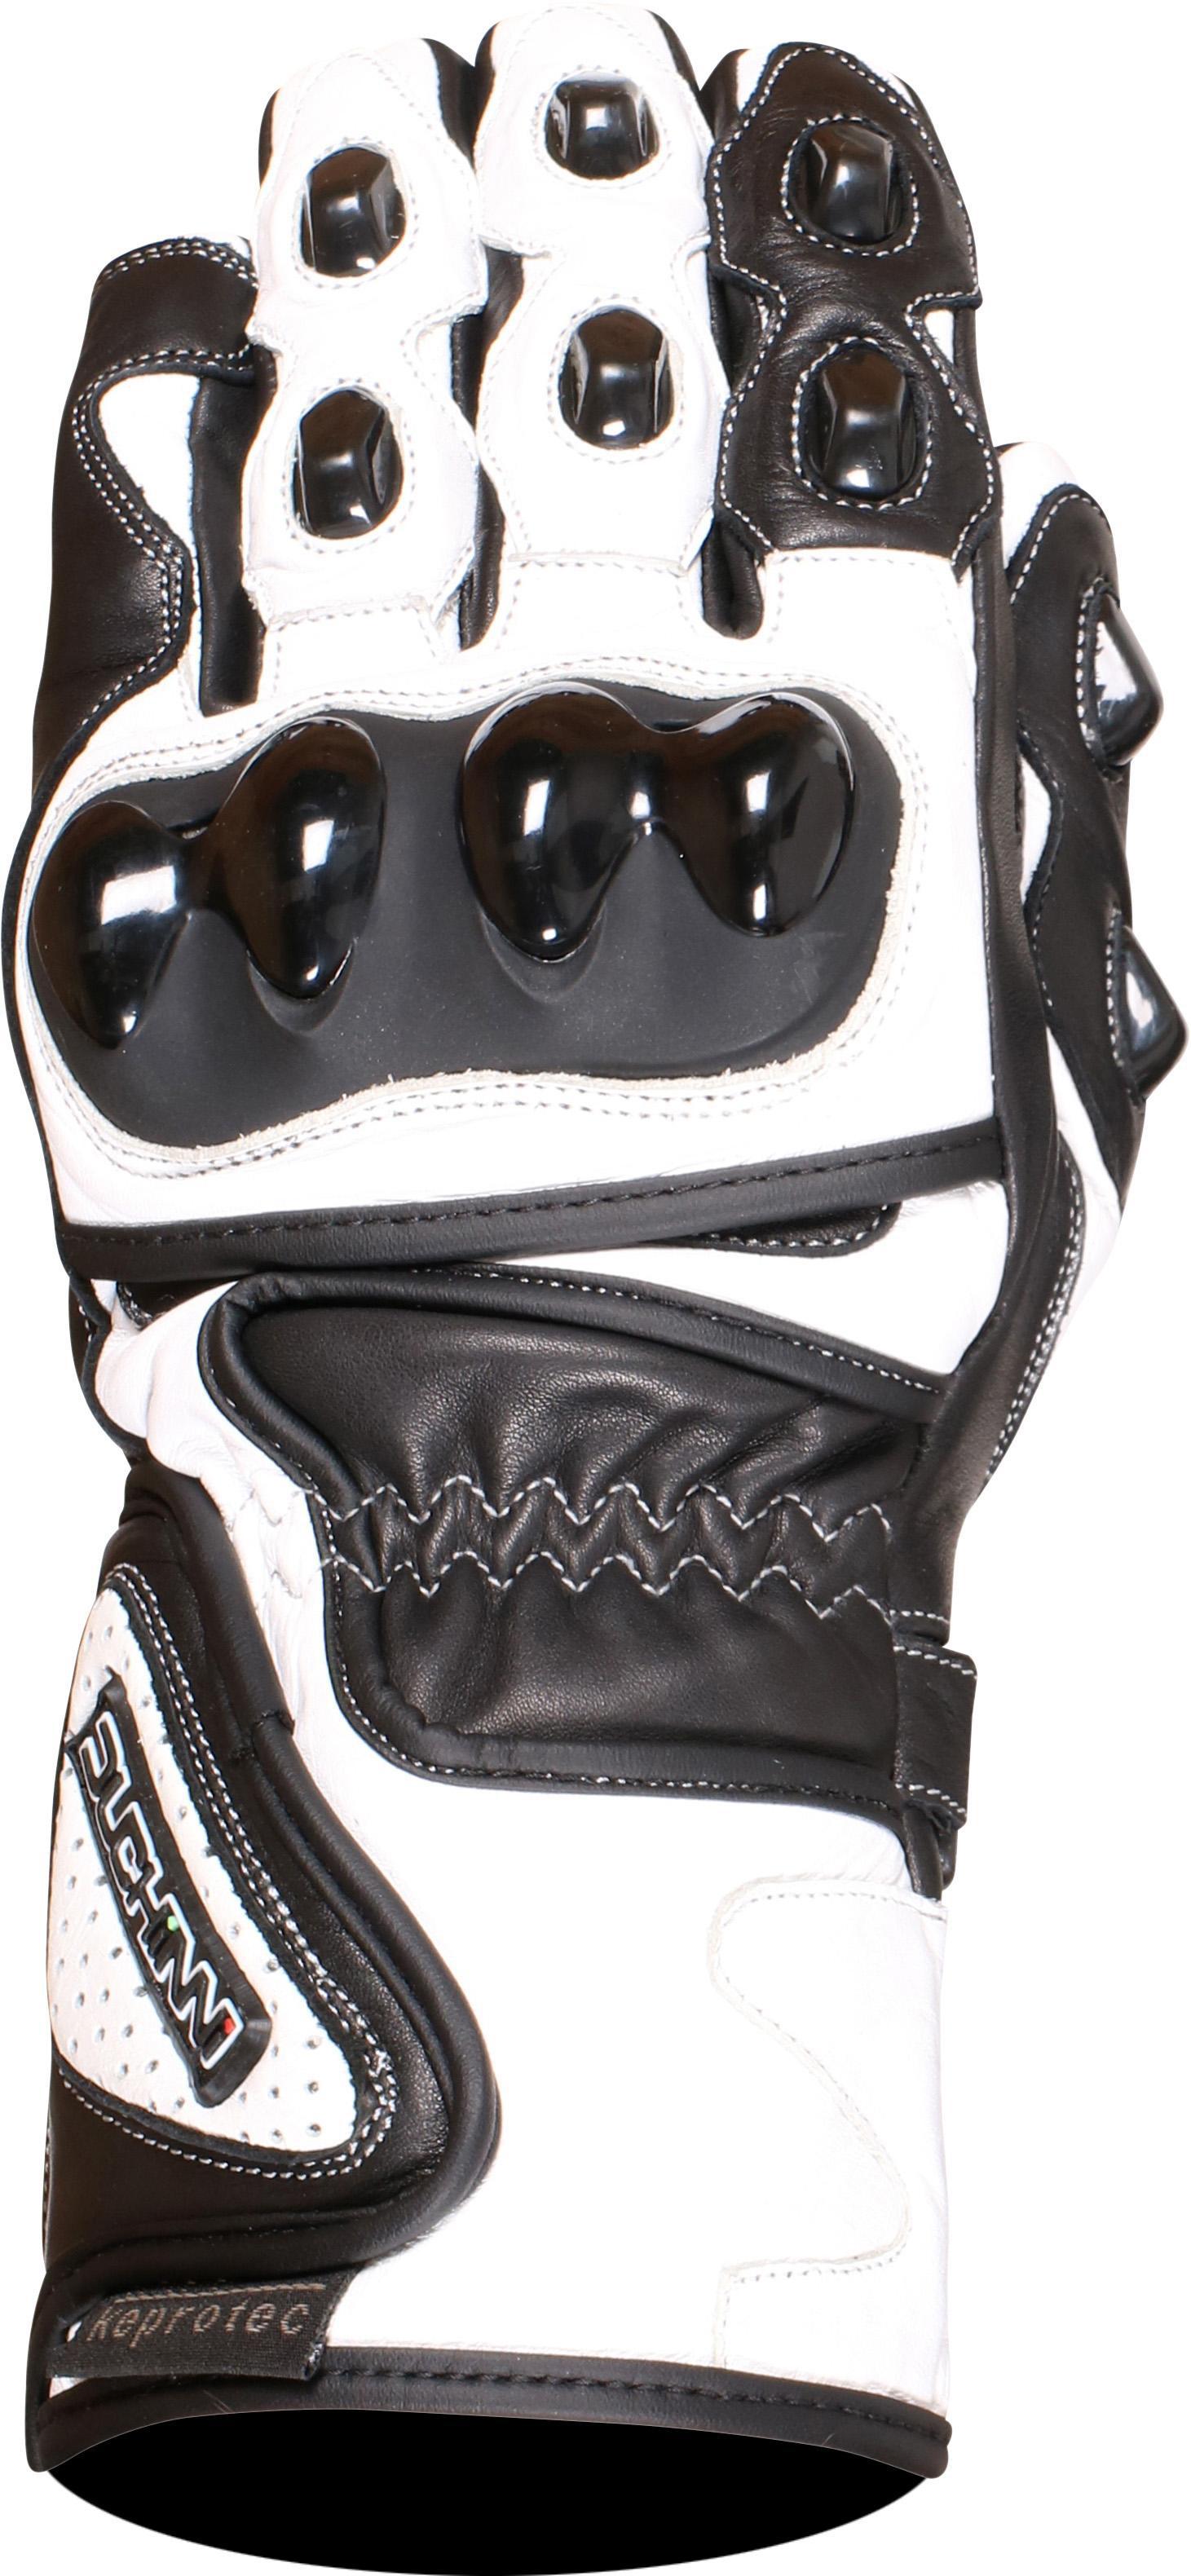 Duchinni Dr1 Motorcycle Gloves - Black And White, L